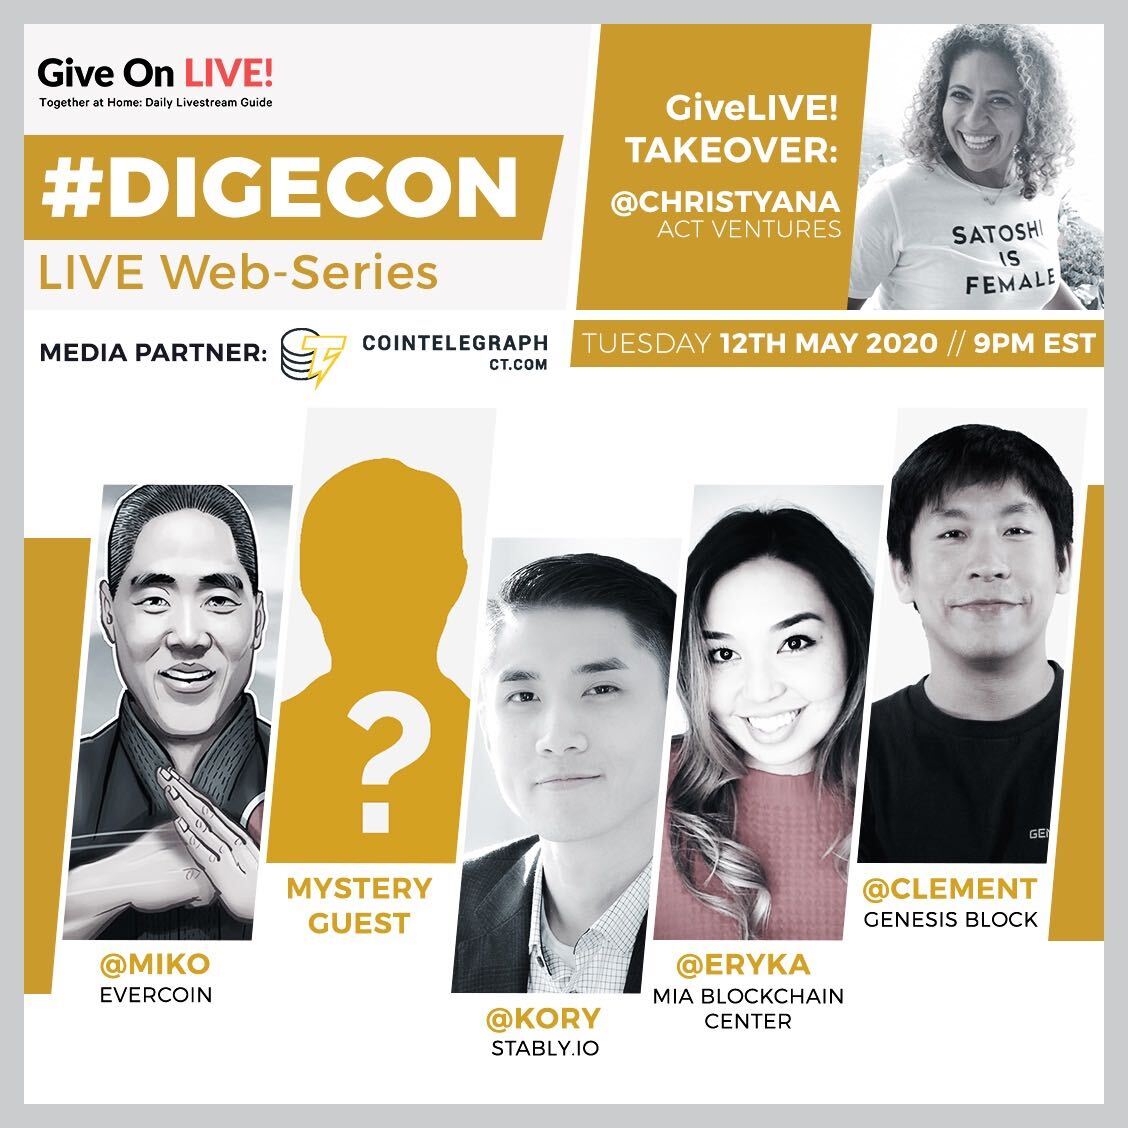 Kory on #DigEcon Live Web-Series_Stably-01